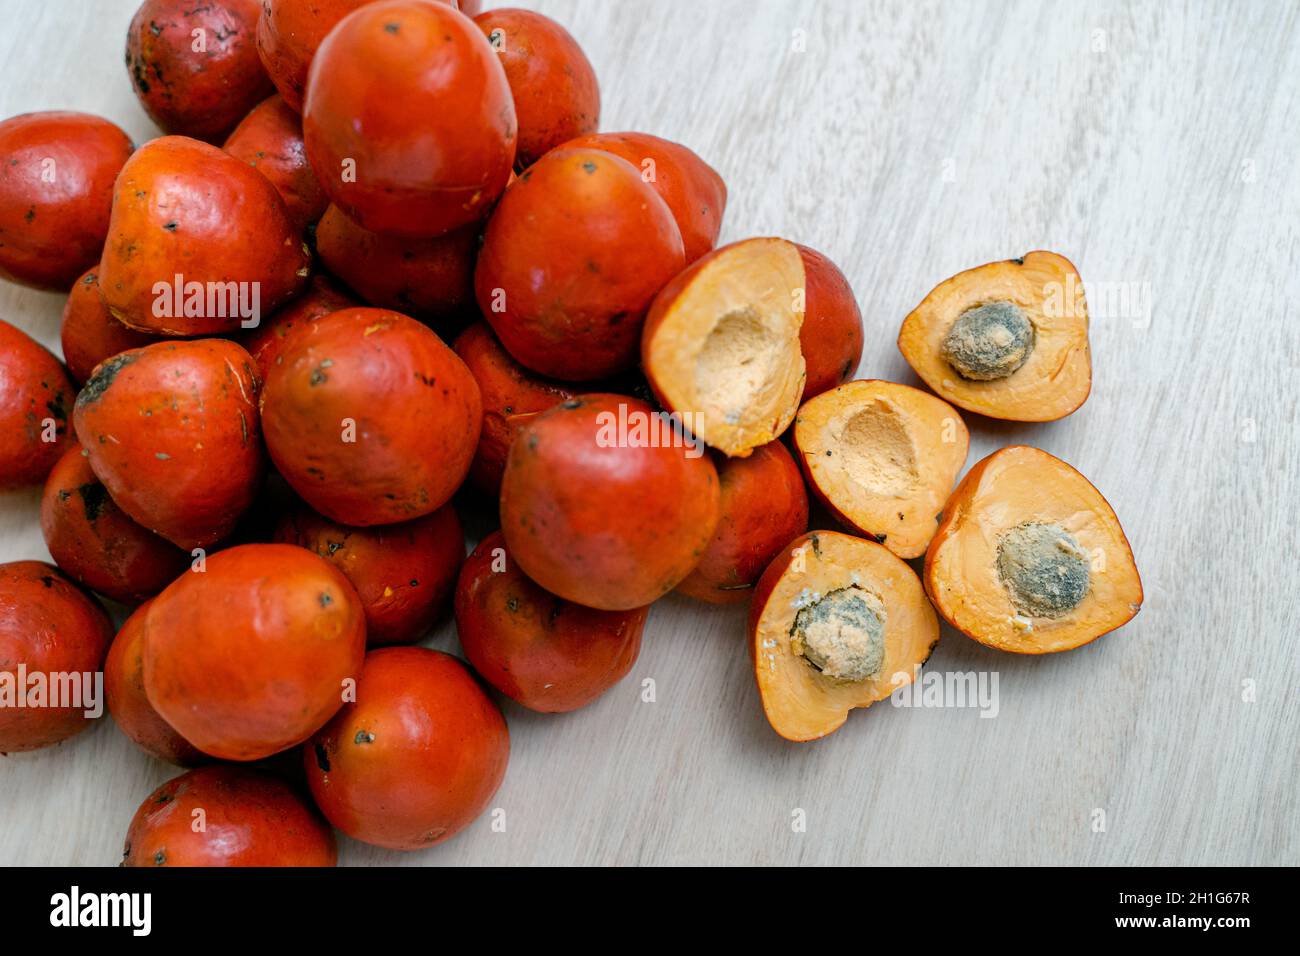 Top view of whole and halved chontaduro fruits on the wooden table Stock Photo